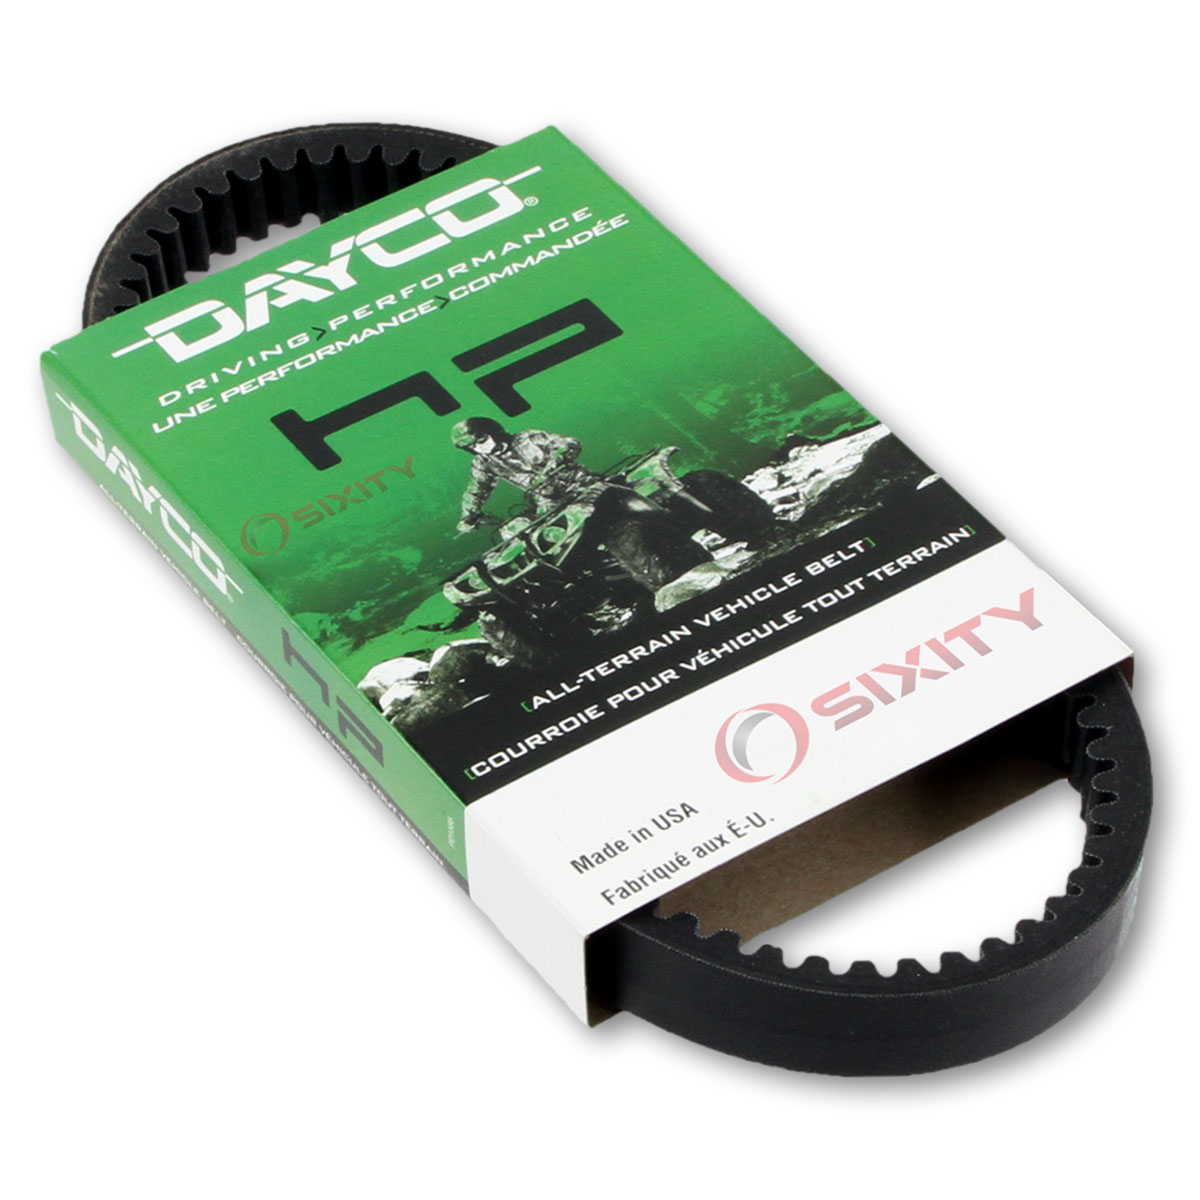 Dayco HP Drive Belt for 2003-2004 Arctic Cat 400 4x4 MRP - High Performance